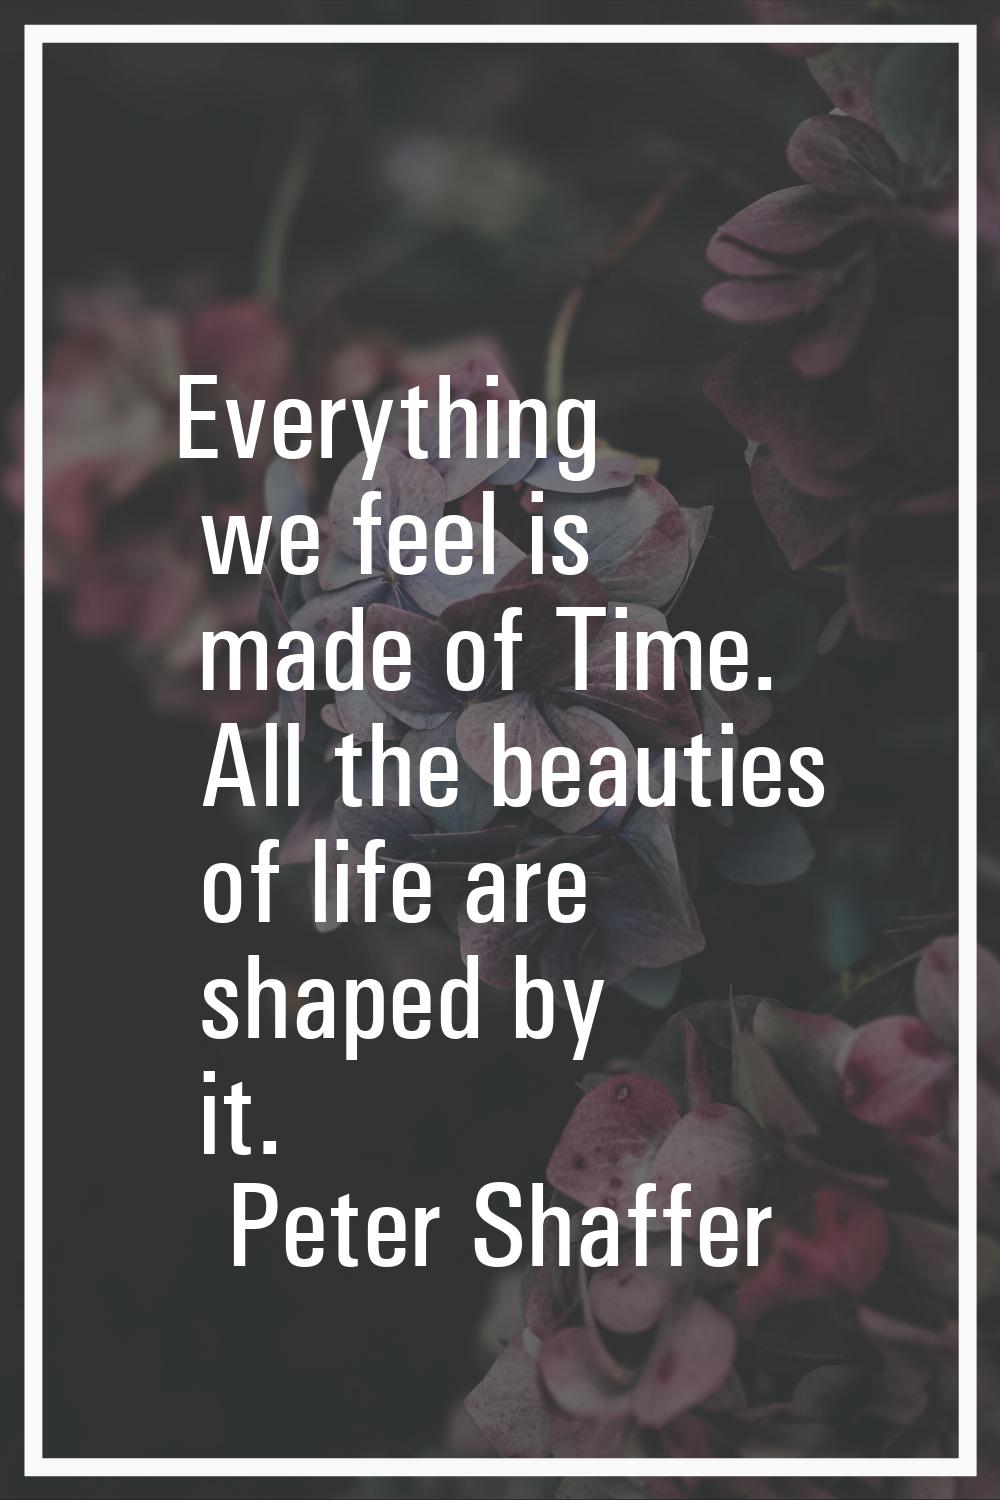 Everything we feel is made of Time. All the beauties of life are shaped by it.